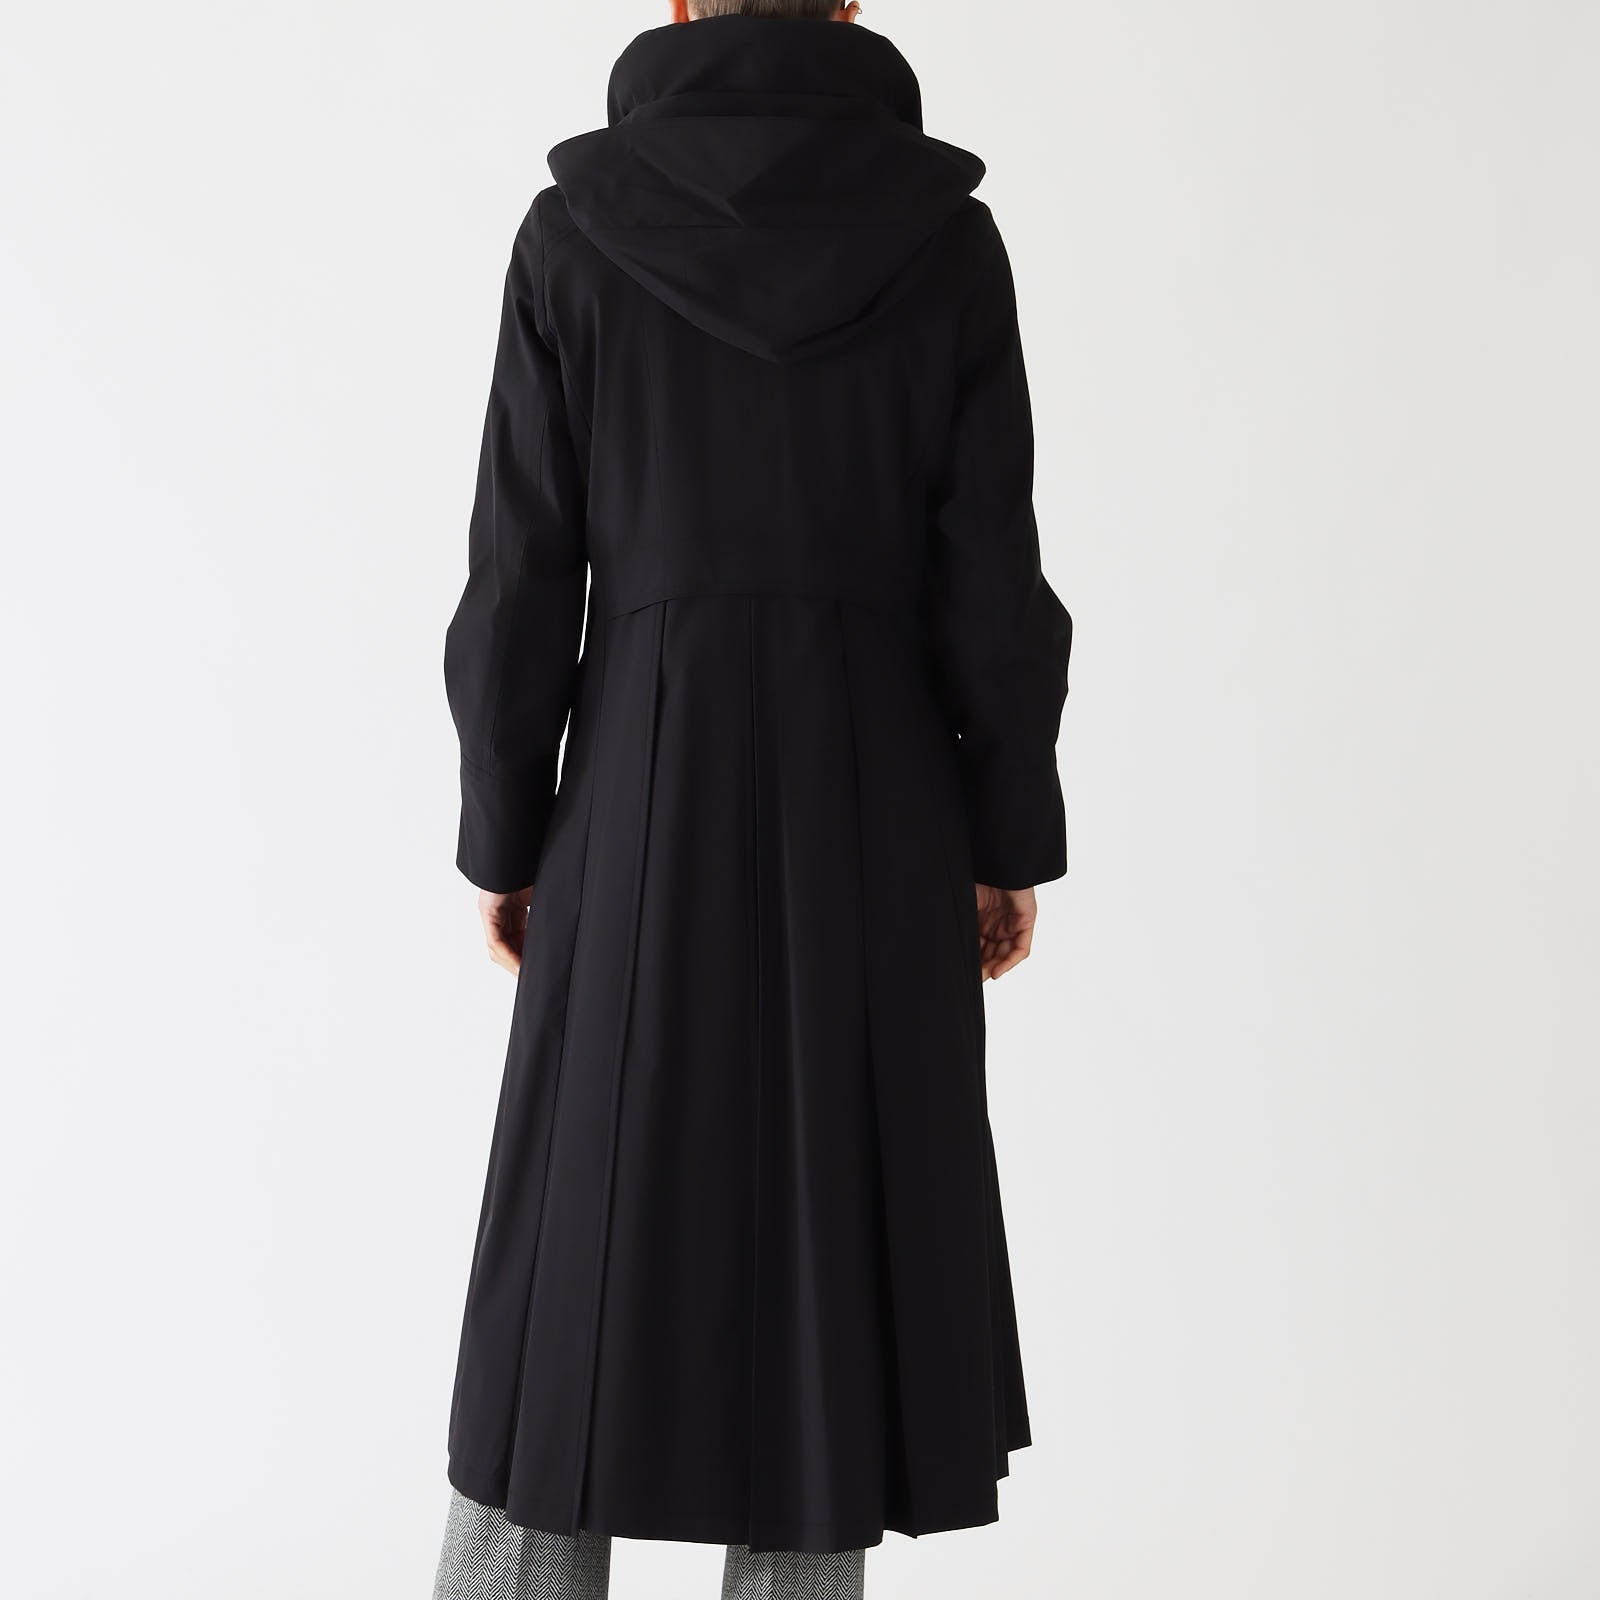 Moira Black Coat With Pleated Back